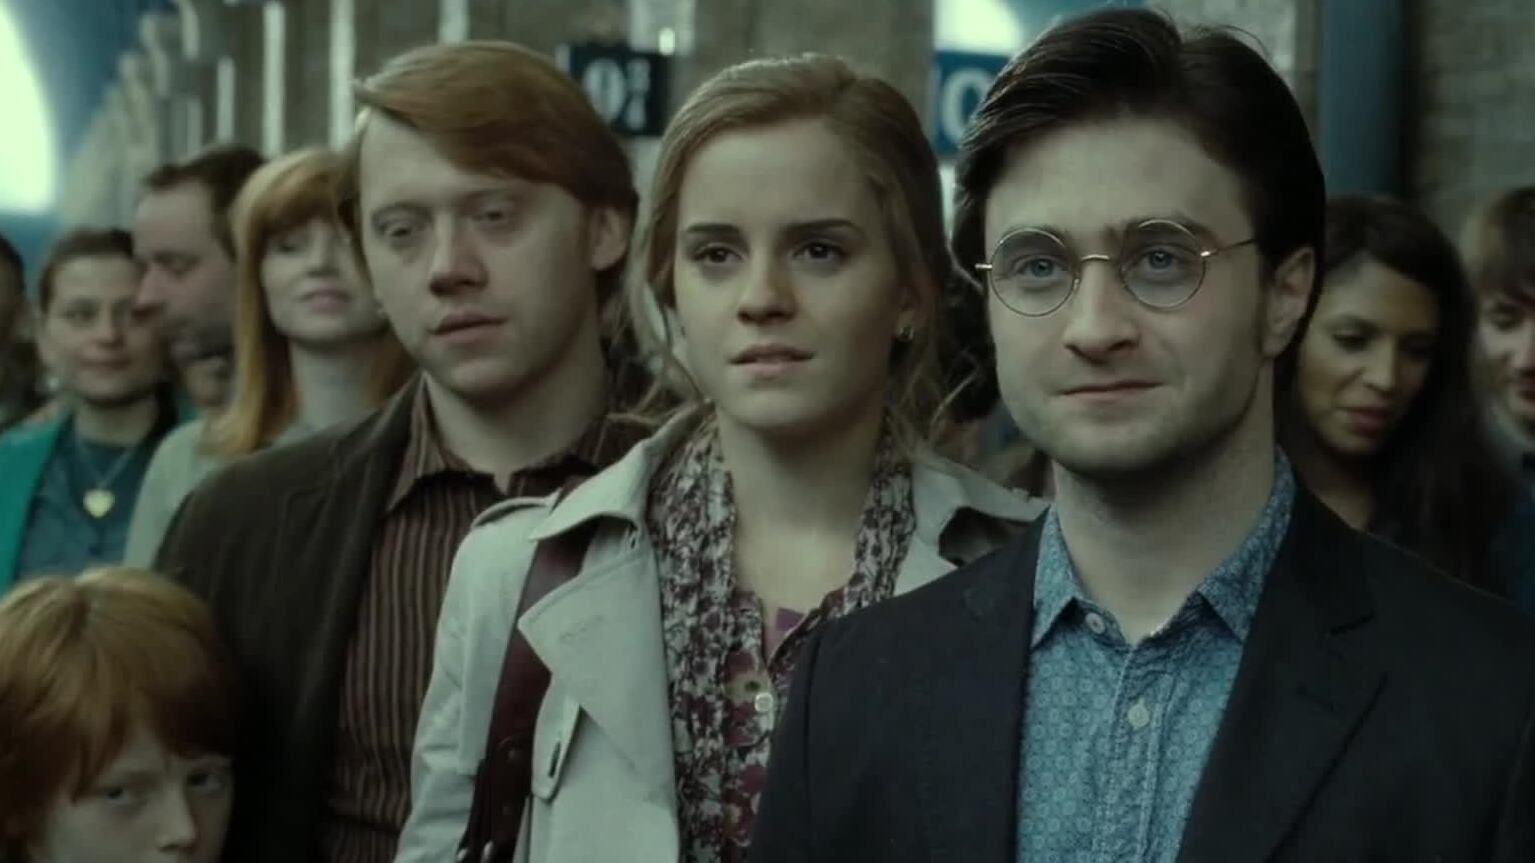 Harry Potter series: Expected release date and the latest rumors